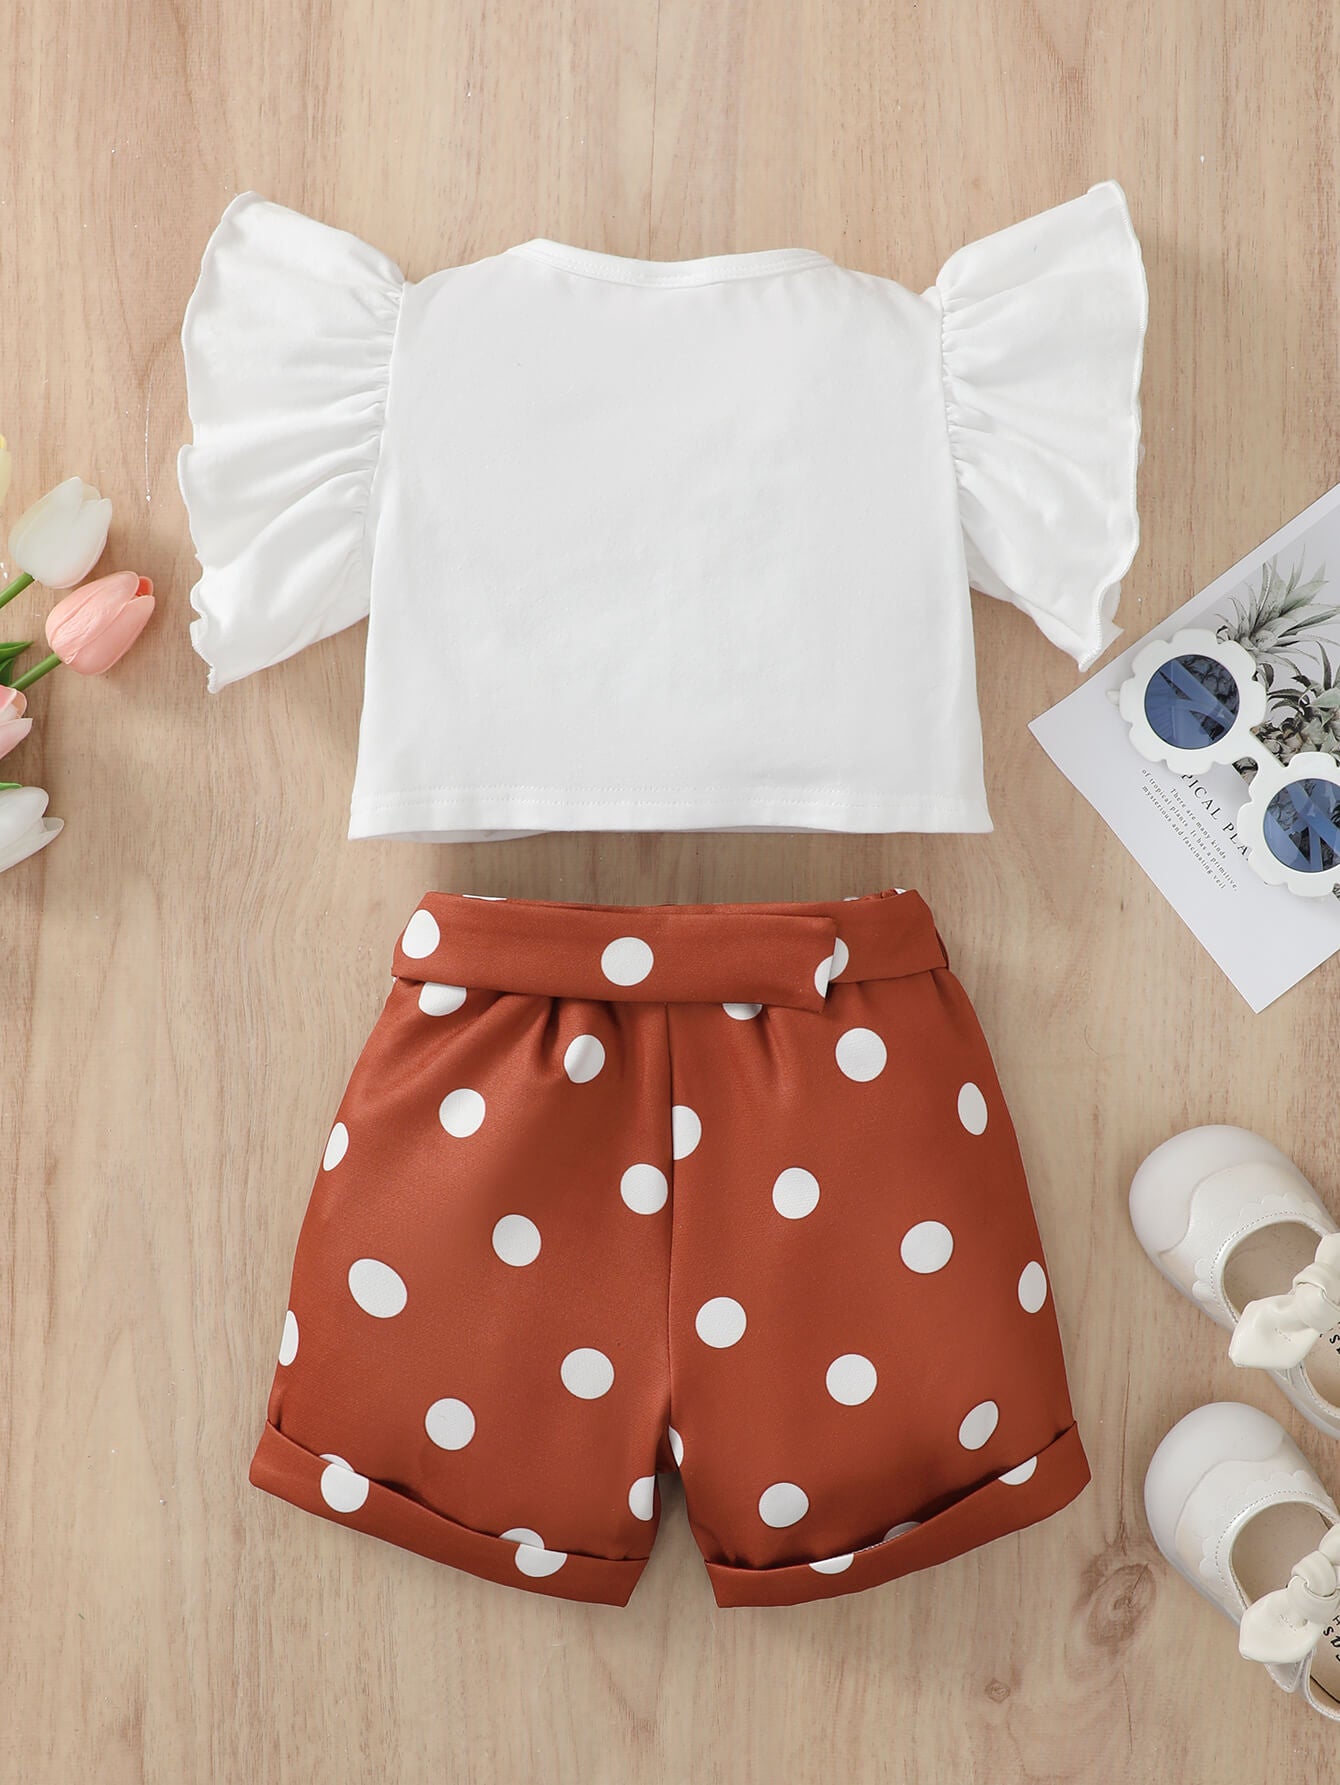 Children’s Girls Graphic Butterfly Sleeve Top and Polka Dot Shorts Set